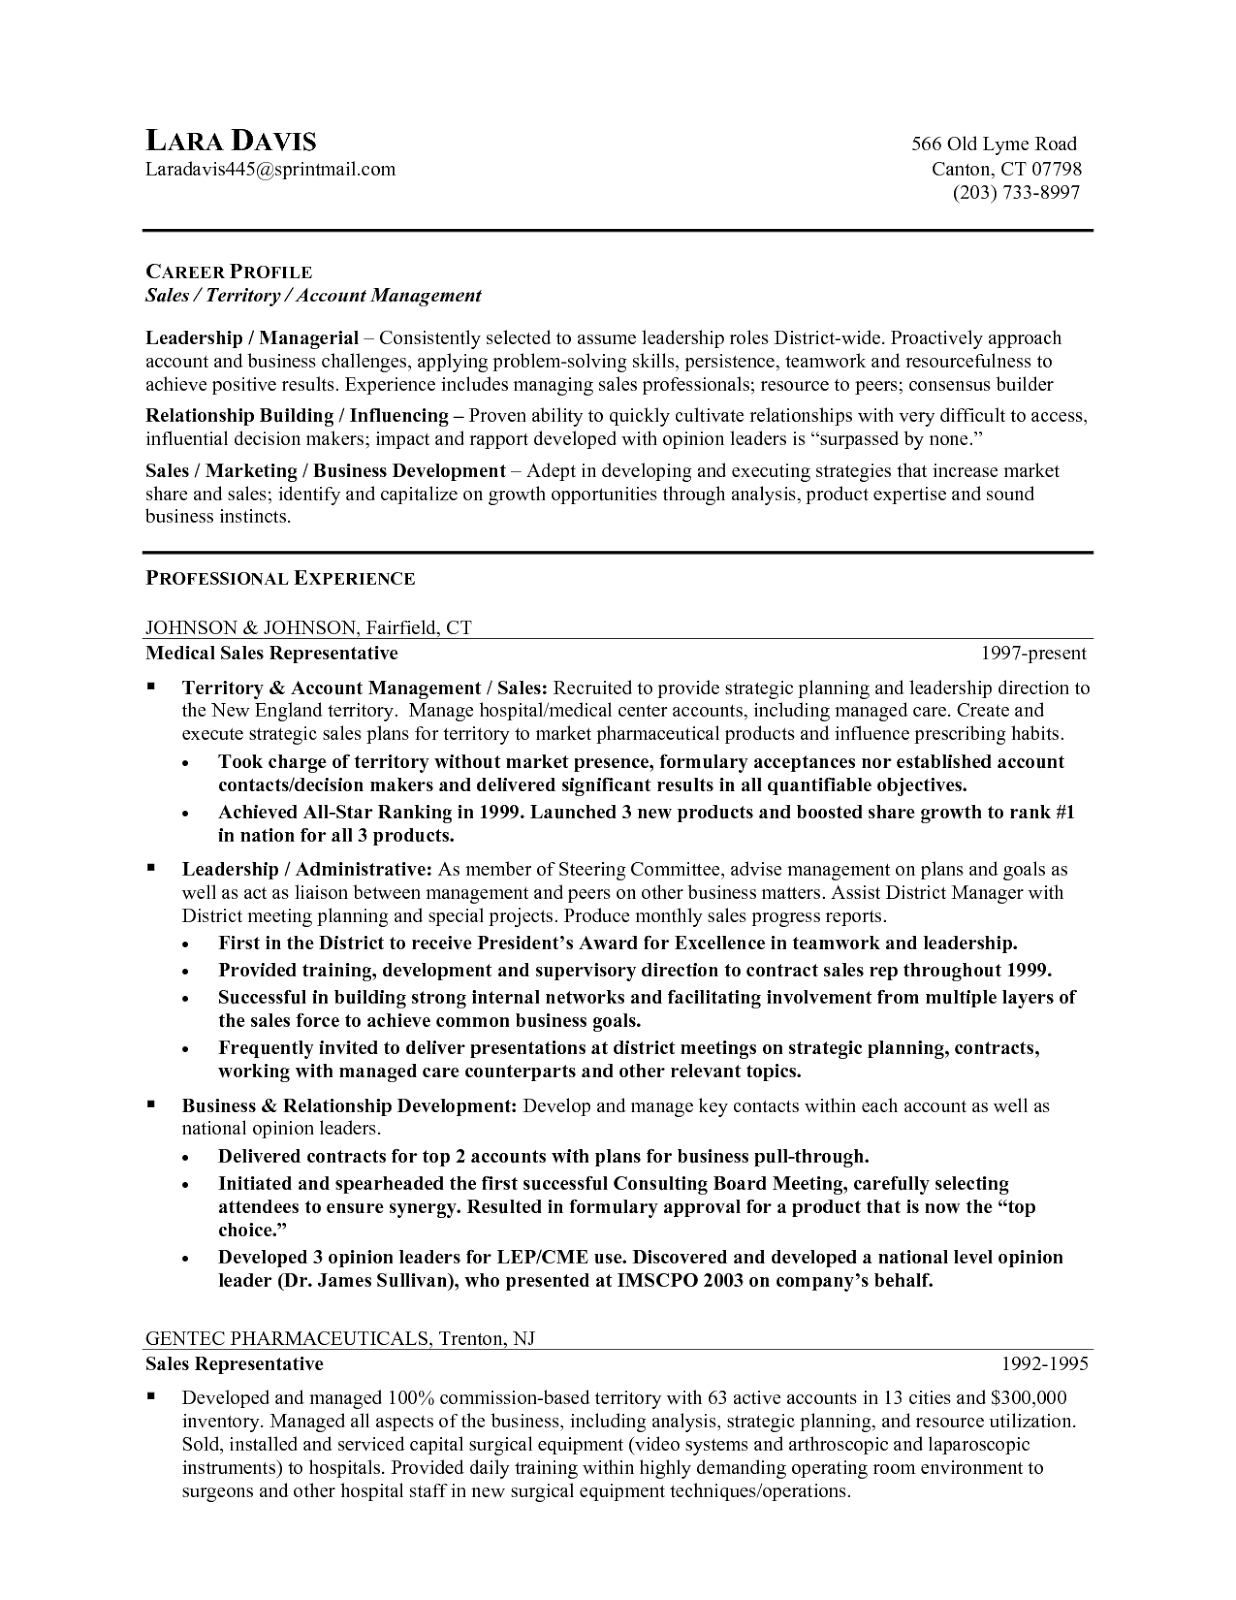 Resume career objectives example